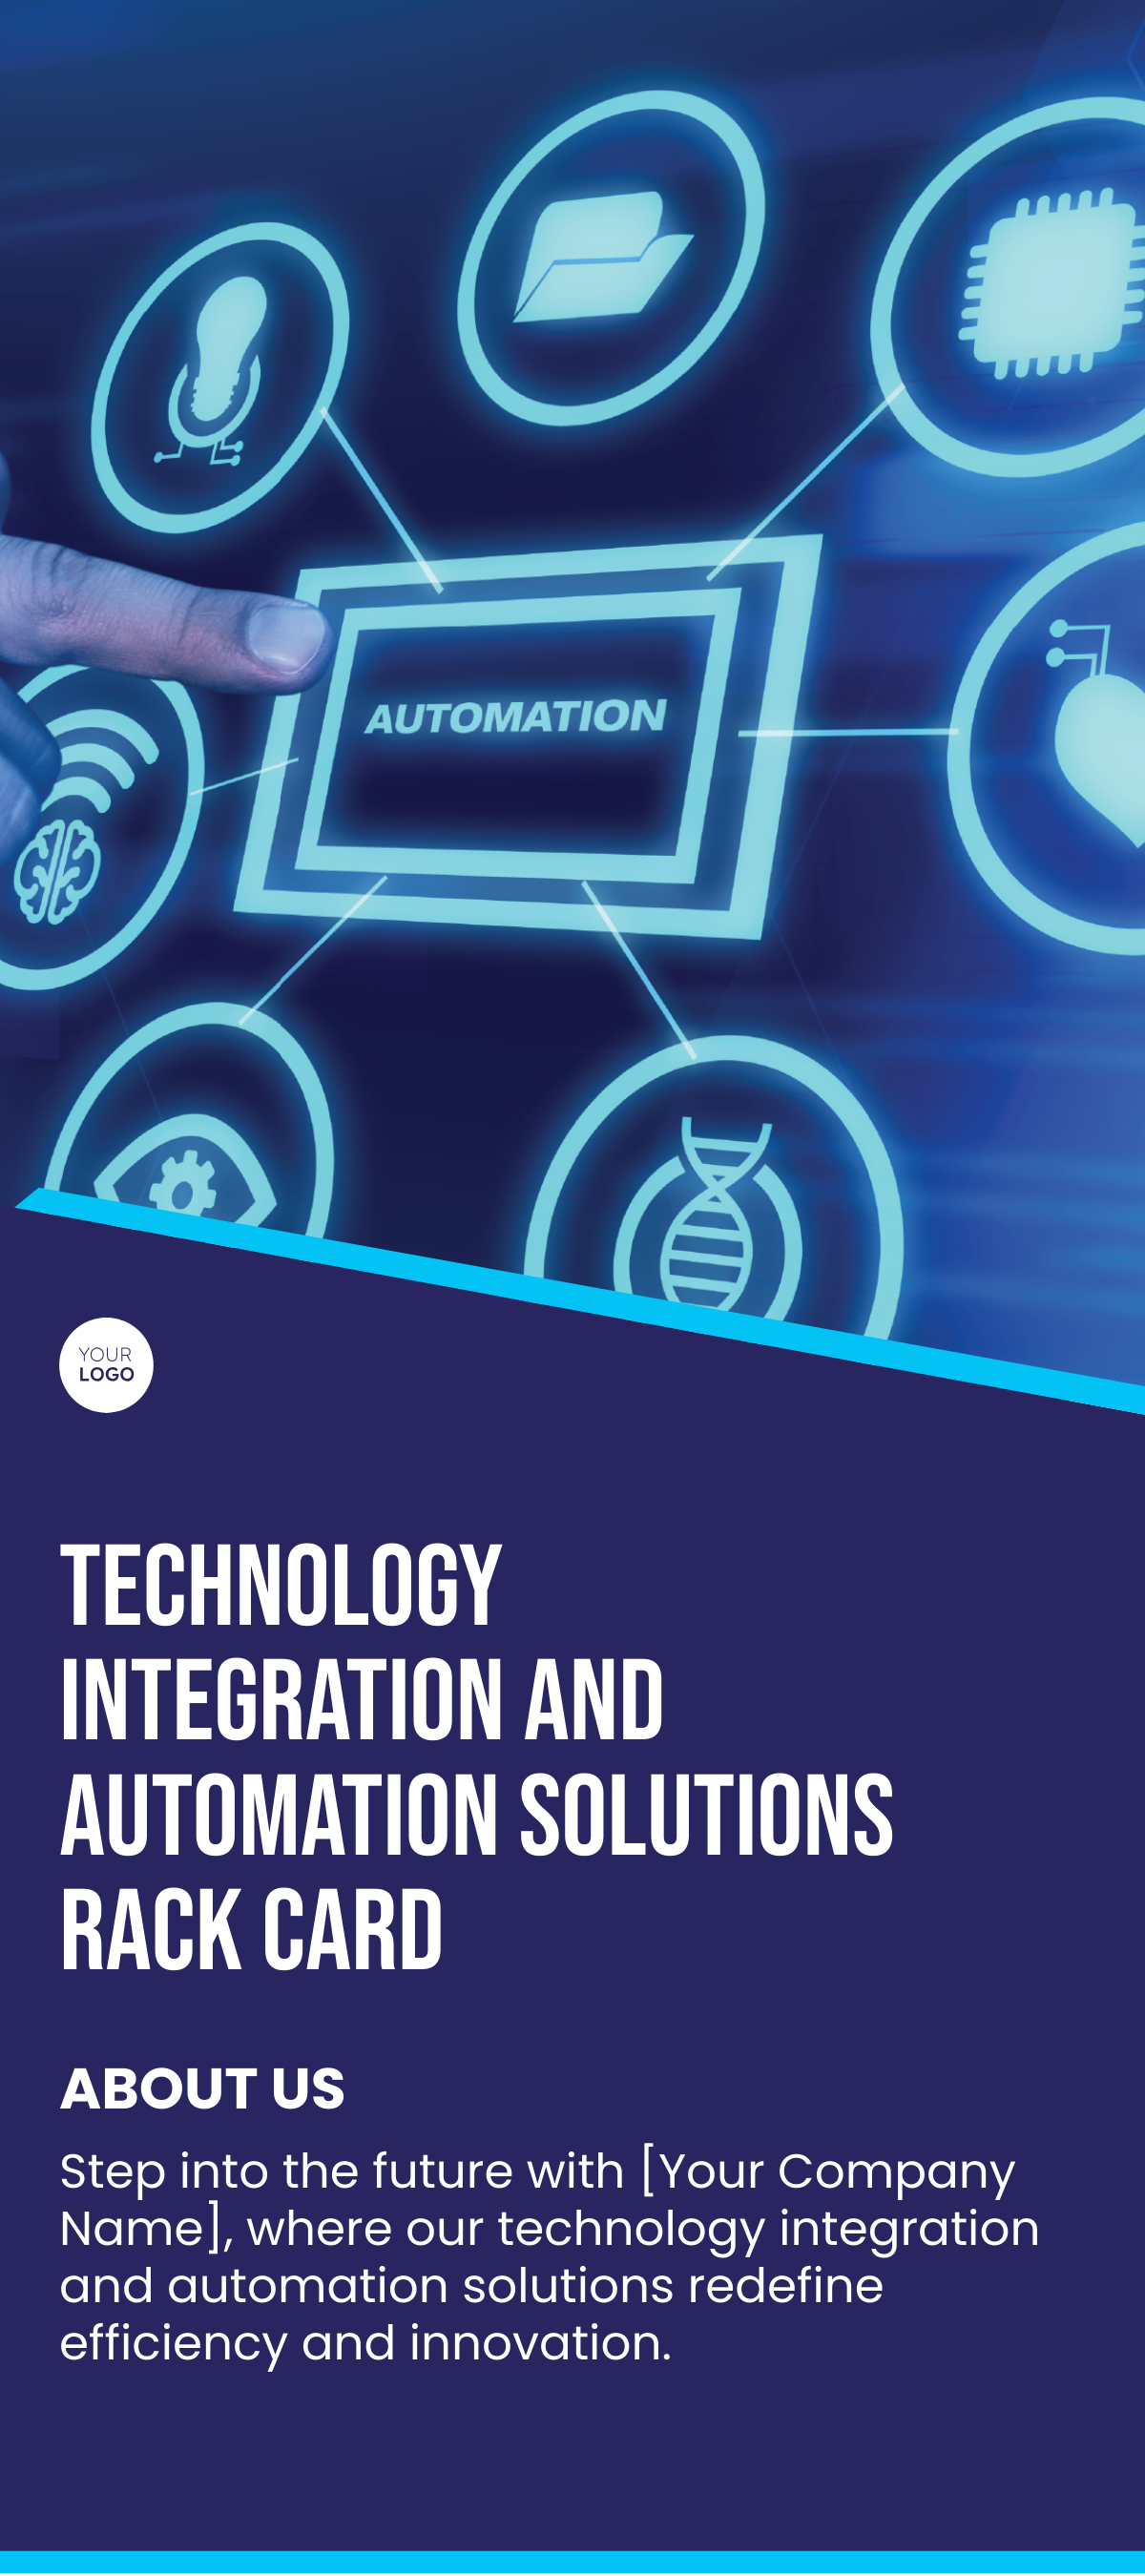 Technology Integration and Automation Solutions Rack Card